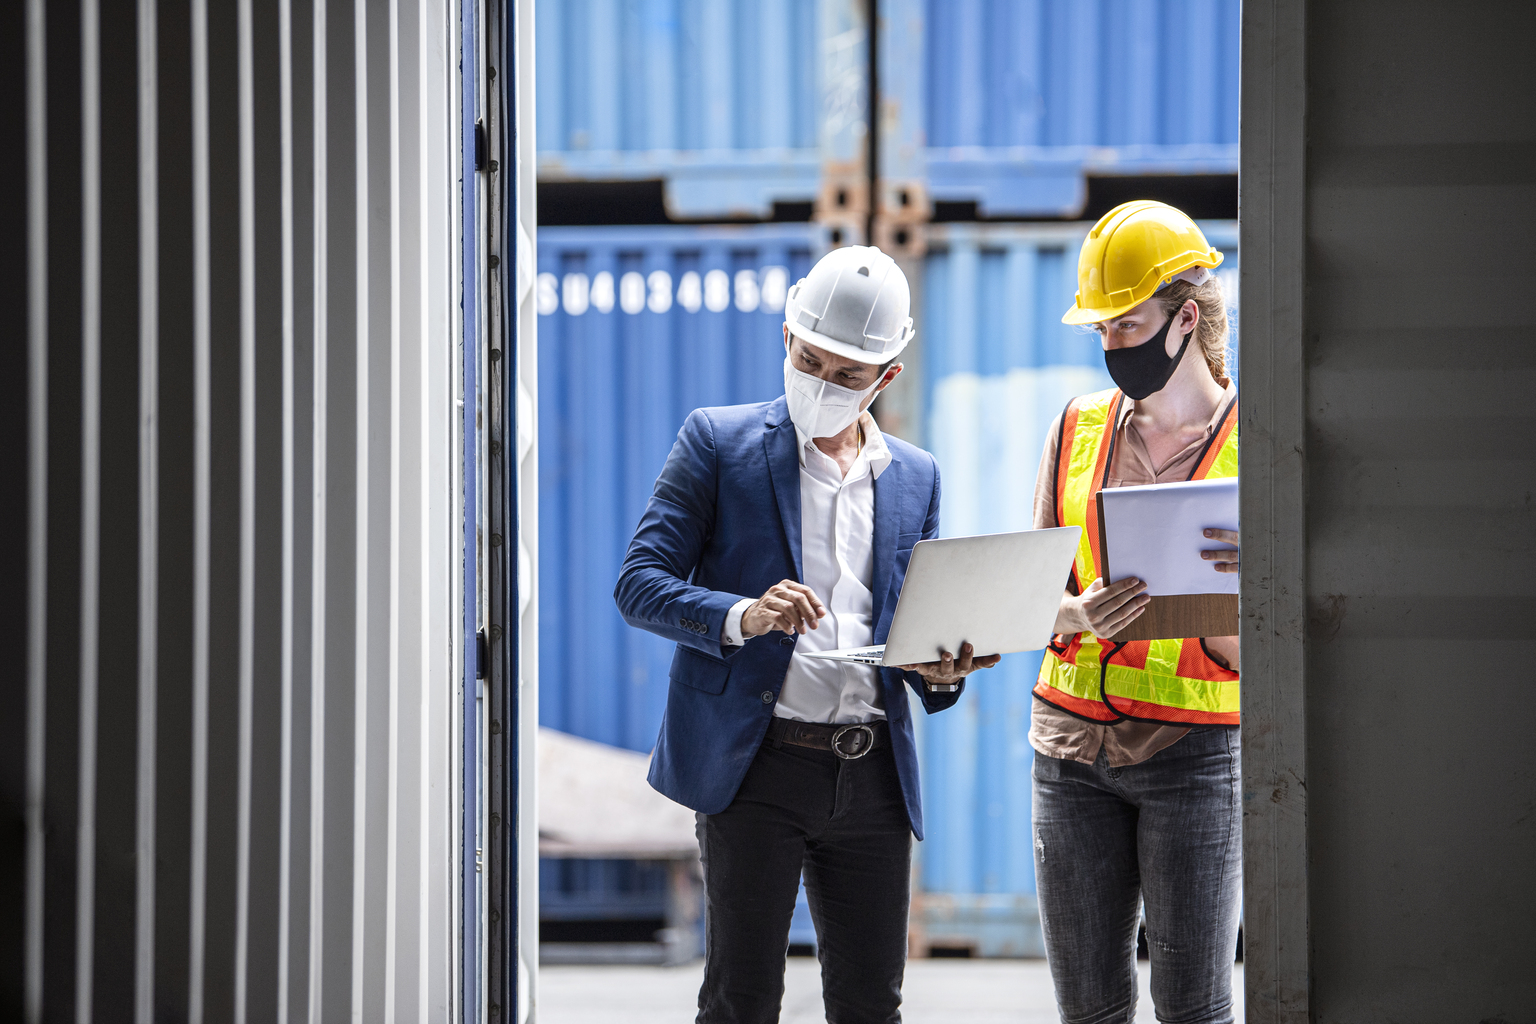 Business man and woman dock worker wearing safety protective clothing and face mask while working front of cargo container door open.